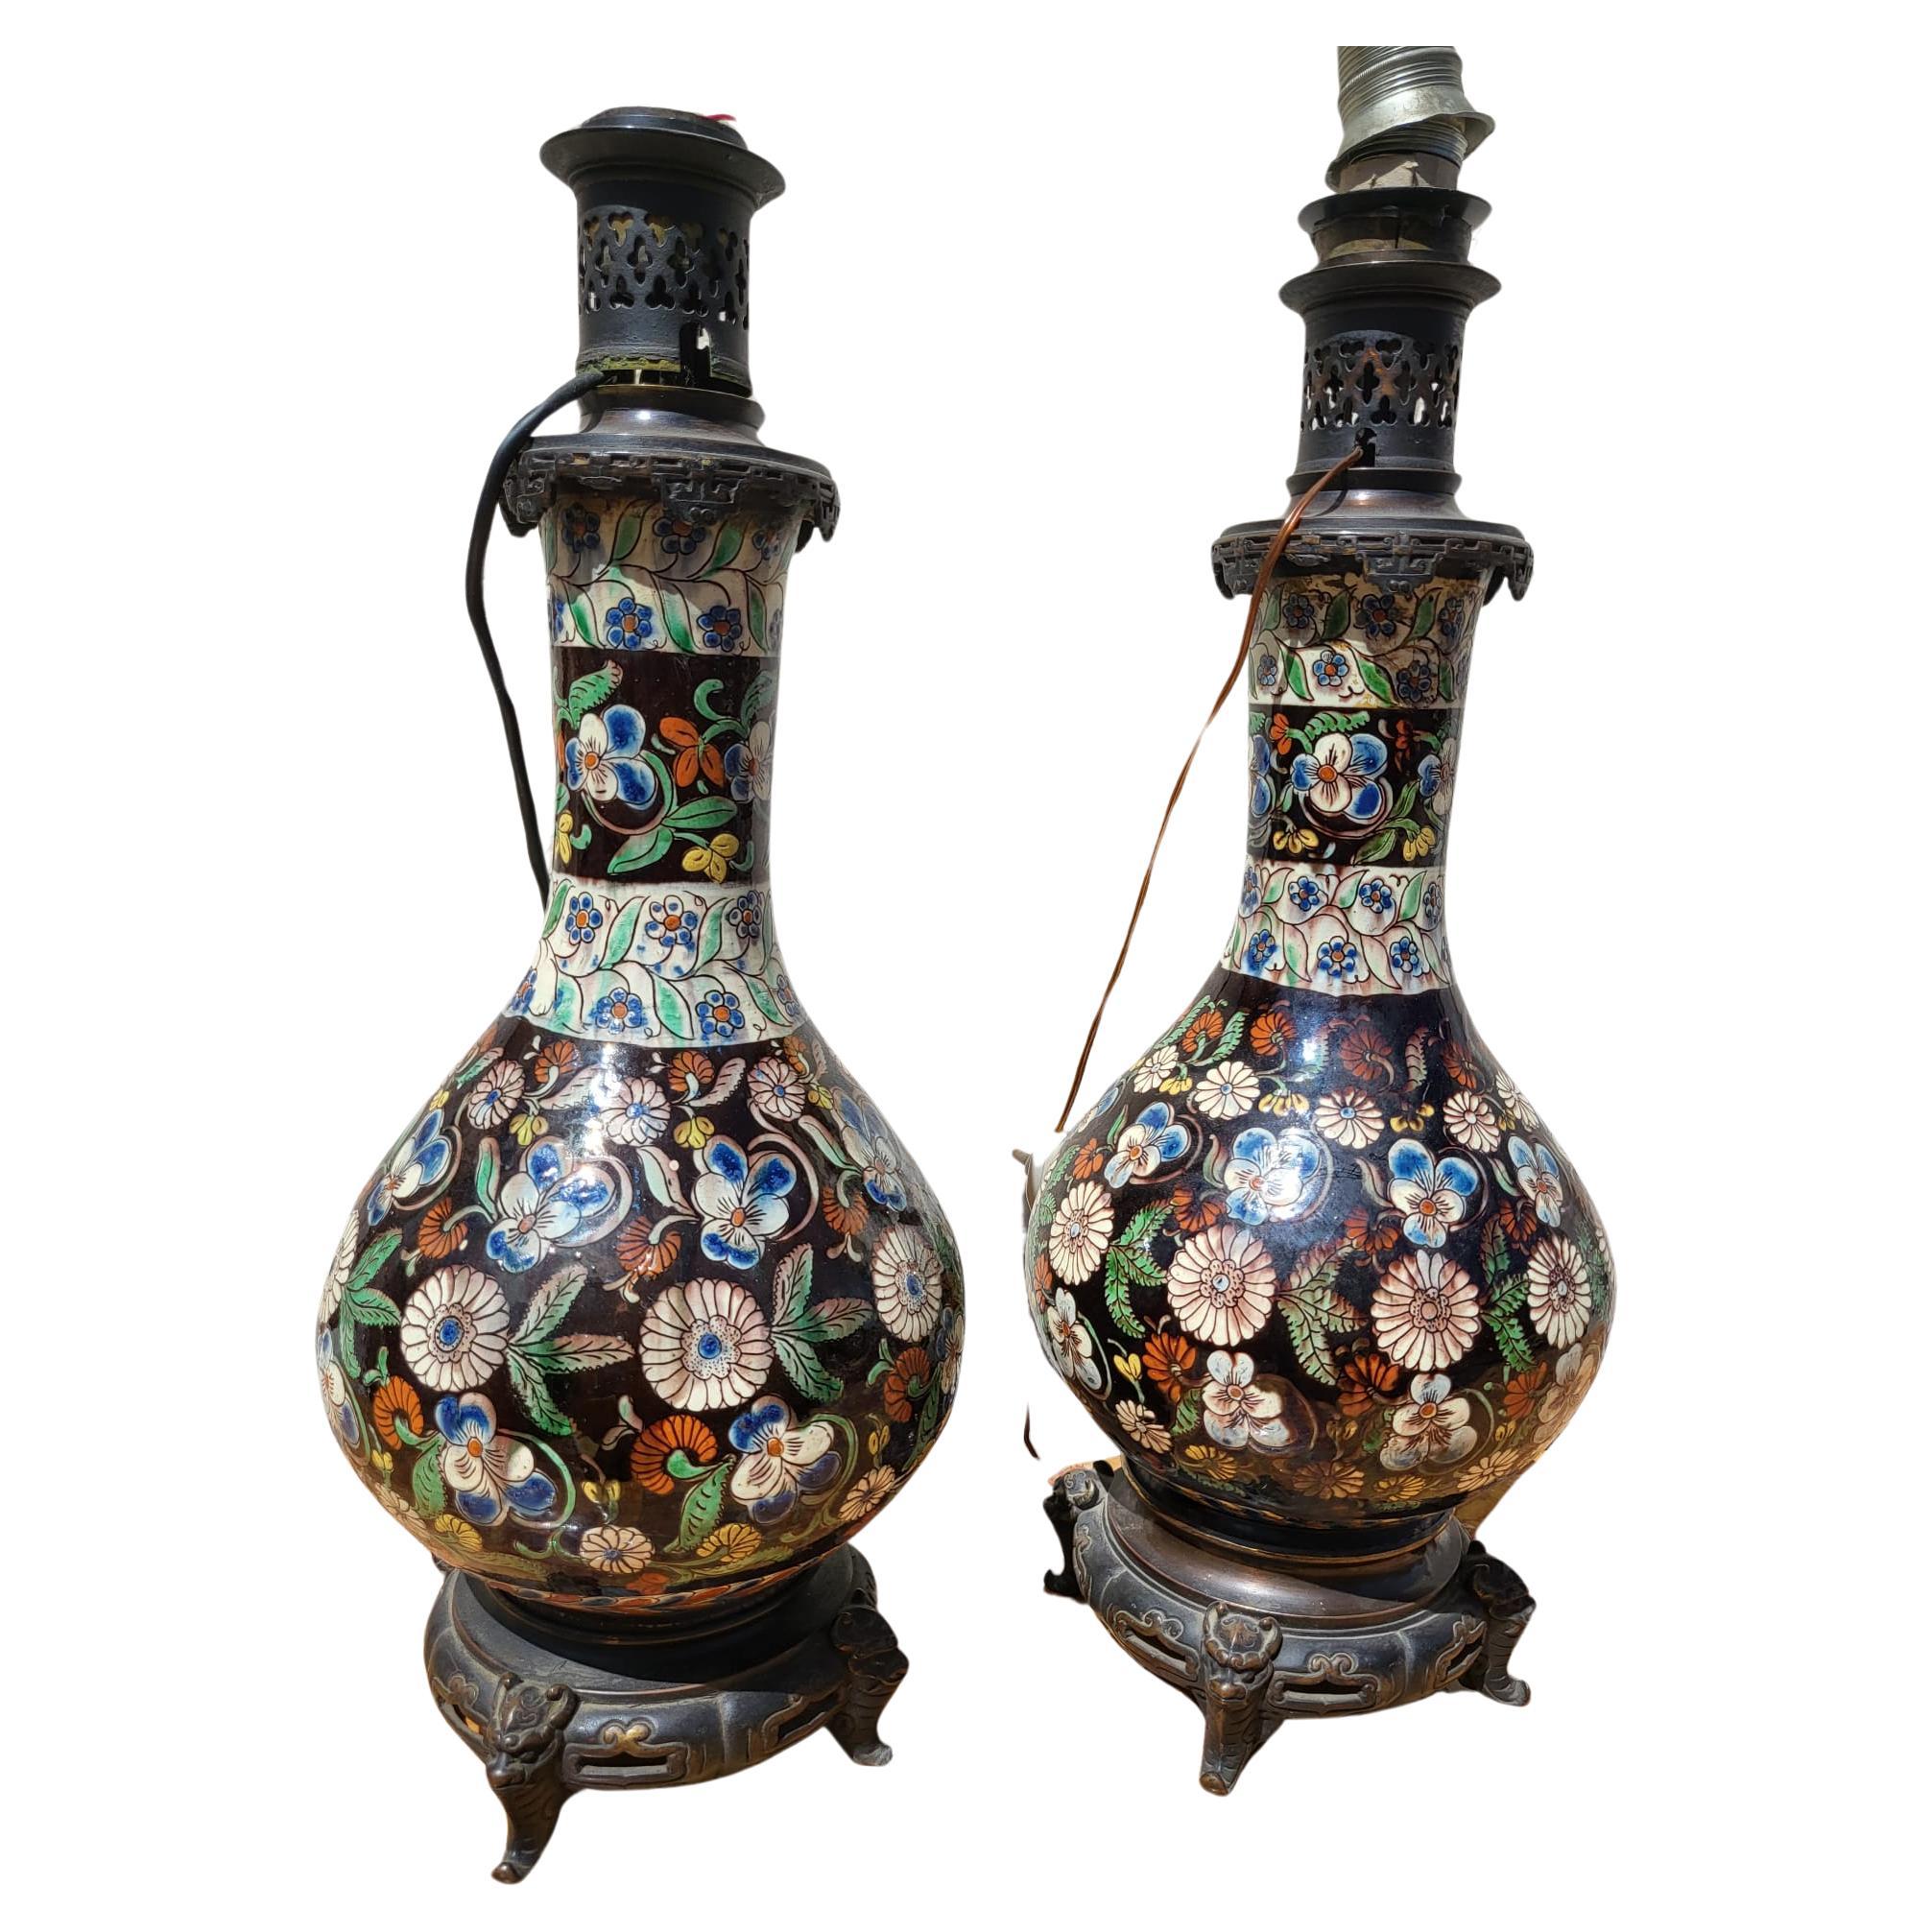 Pair Of Earthenware Lamps From Thun, Late 19th Century